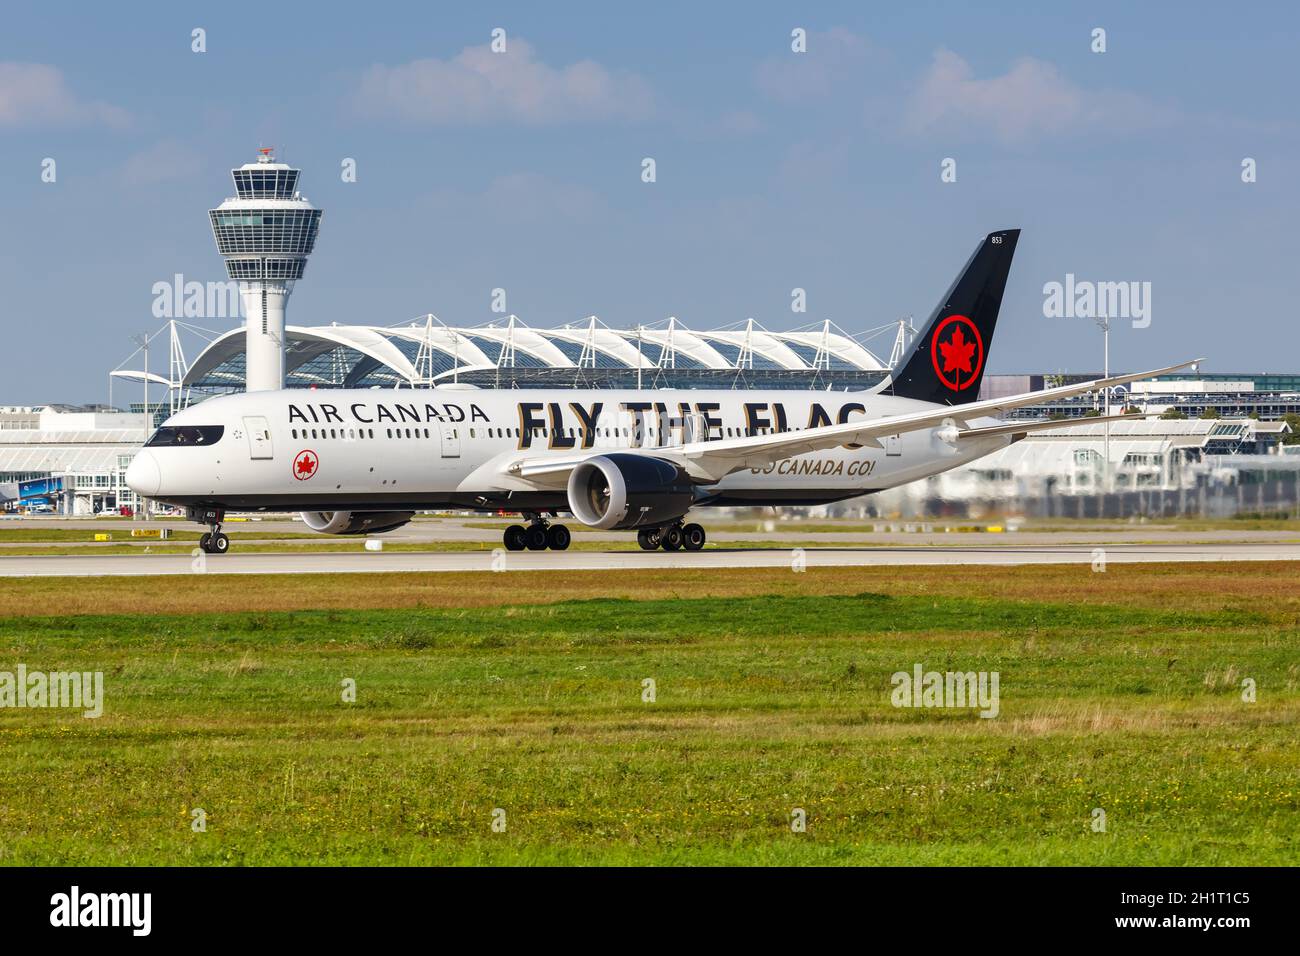 Munich, Germany - September 9, 2021: Air Canada Boeing 787-9 Dreamliner airplane with the Fly The Flag special livery at Munich airport (MUC) in Germa Stock Photo